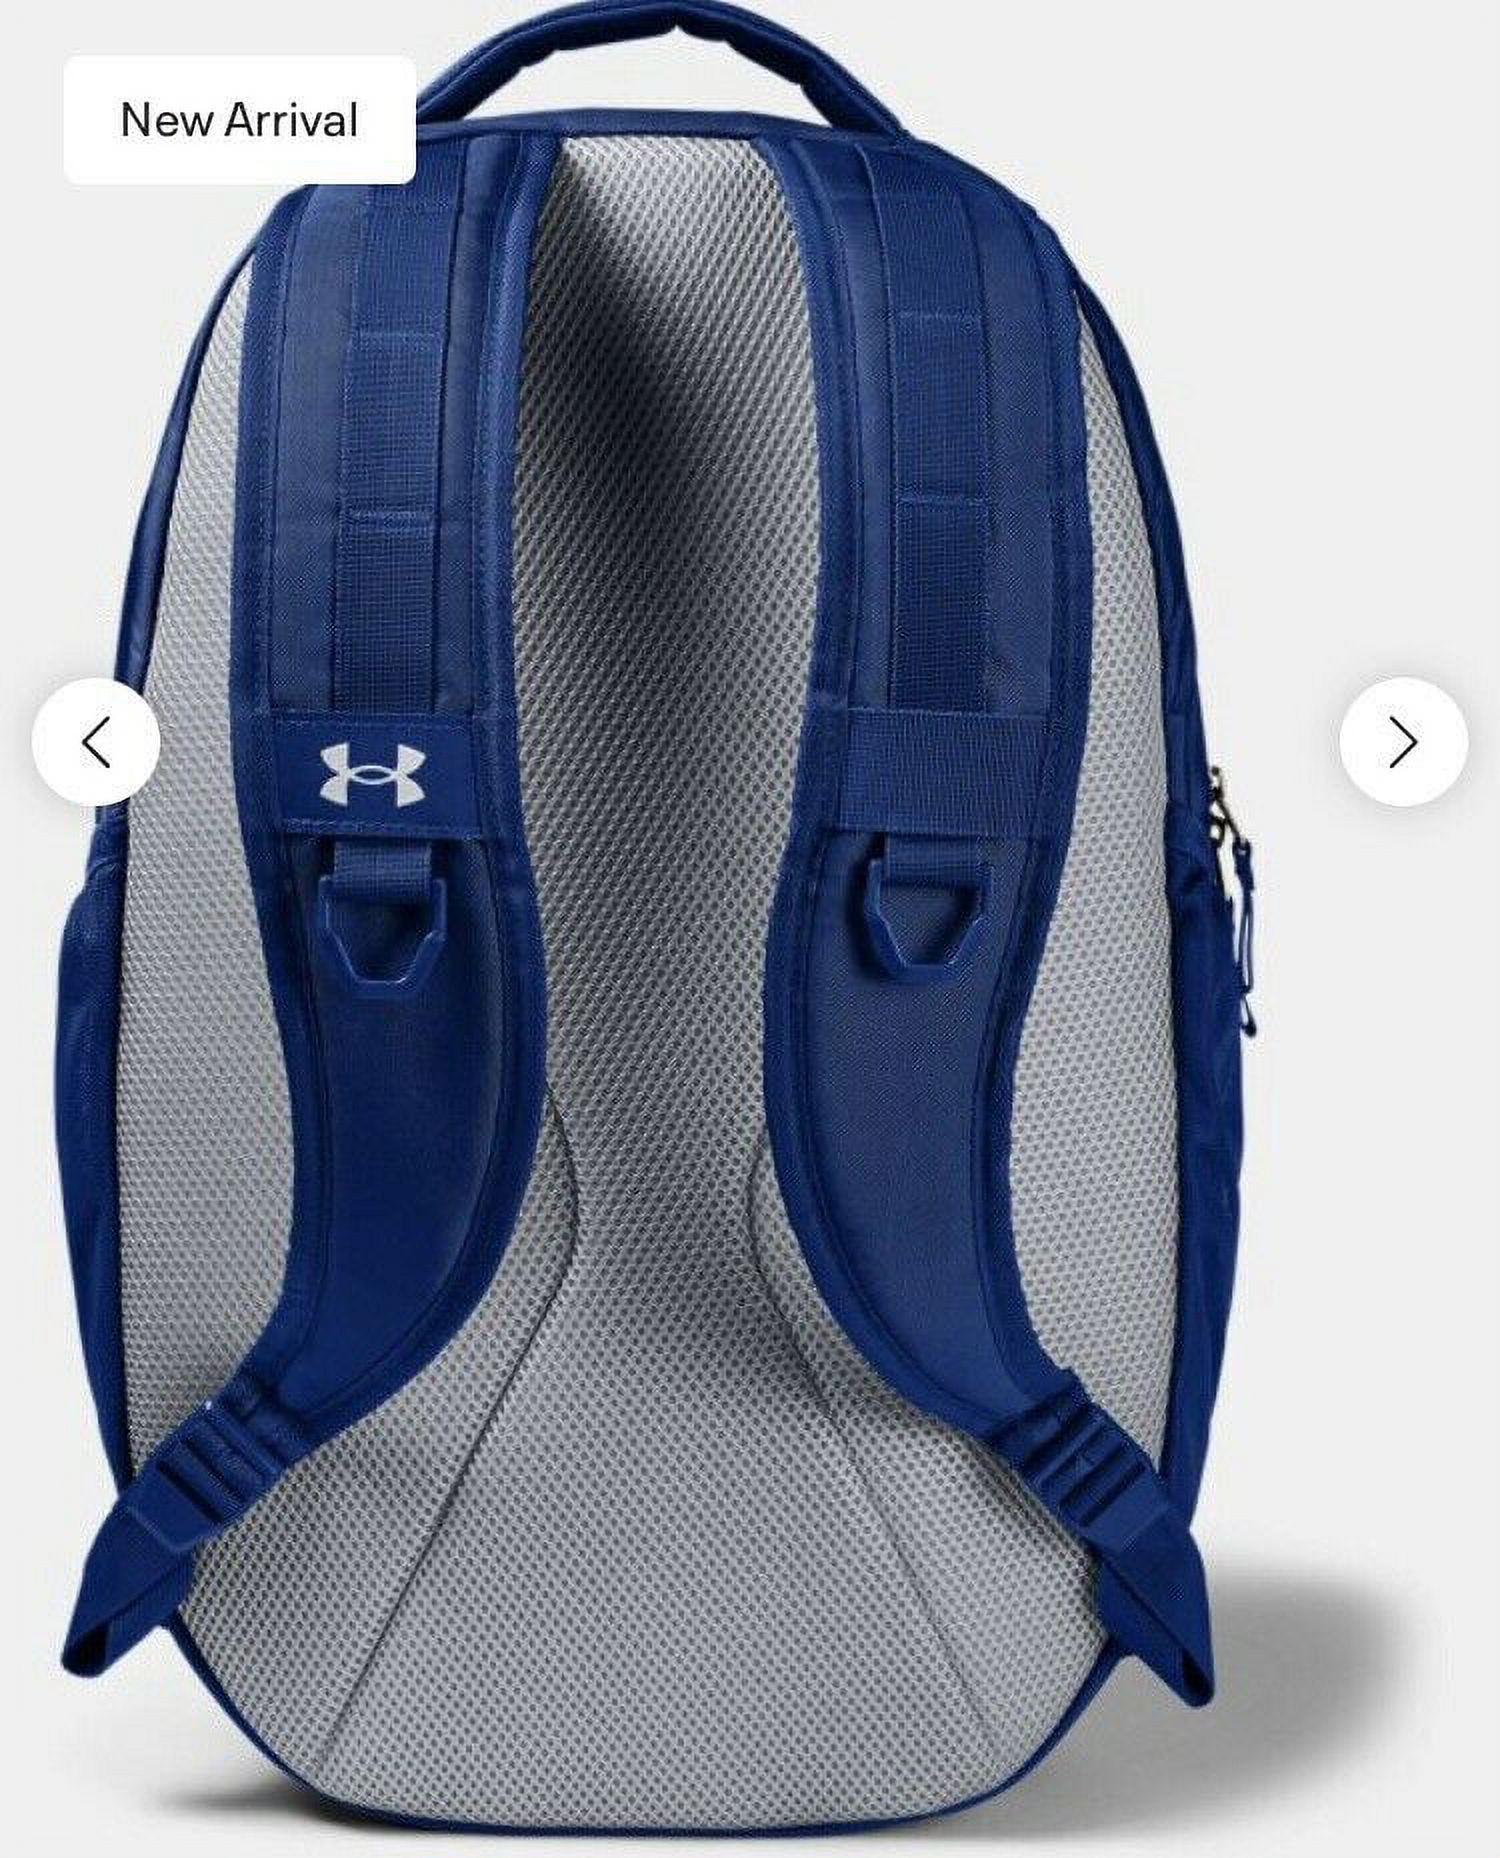 Under Armour 1361176 Adult Hustle 5.0 Backpack, Royal Blue (400) Silver - image 2 of 3